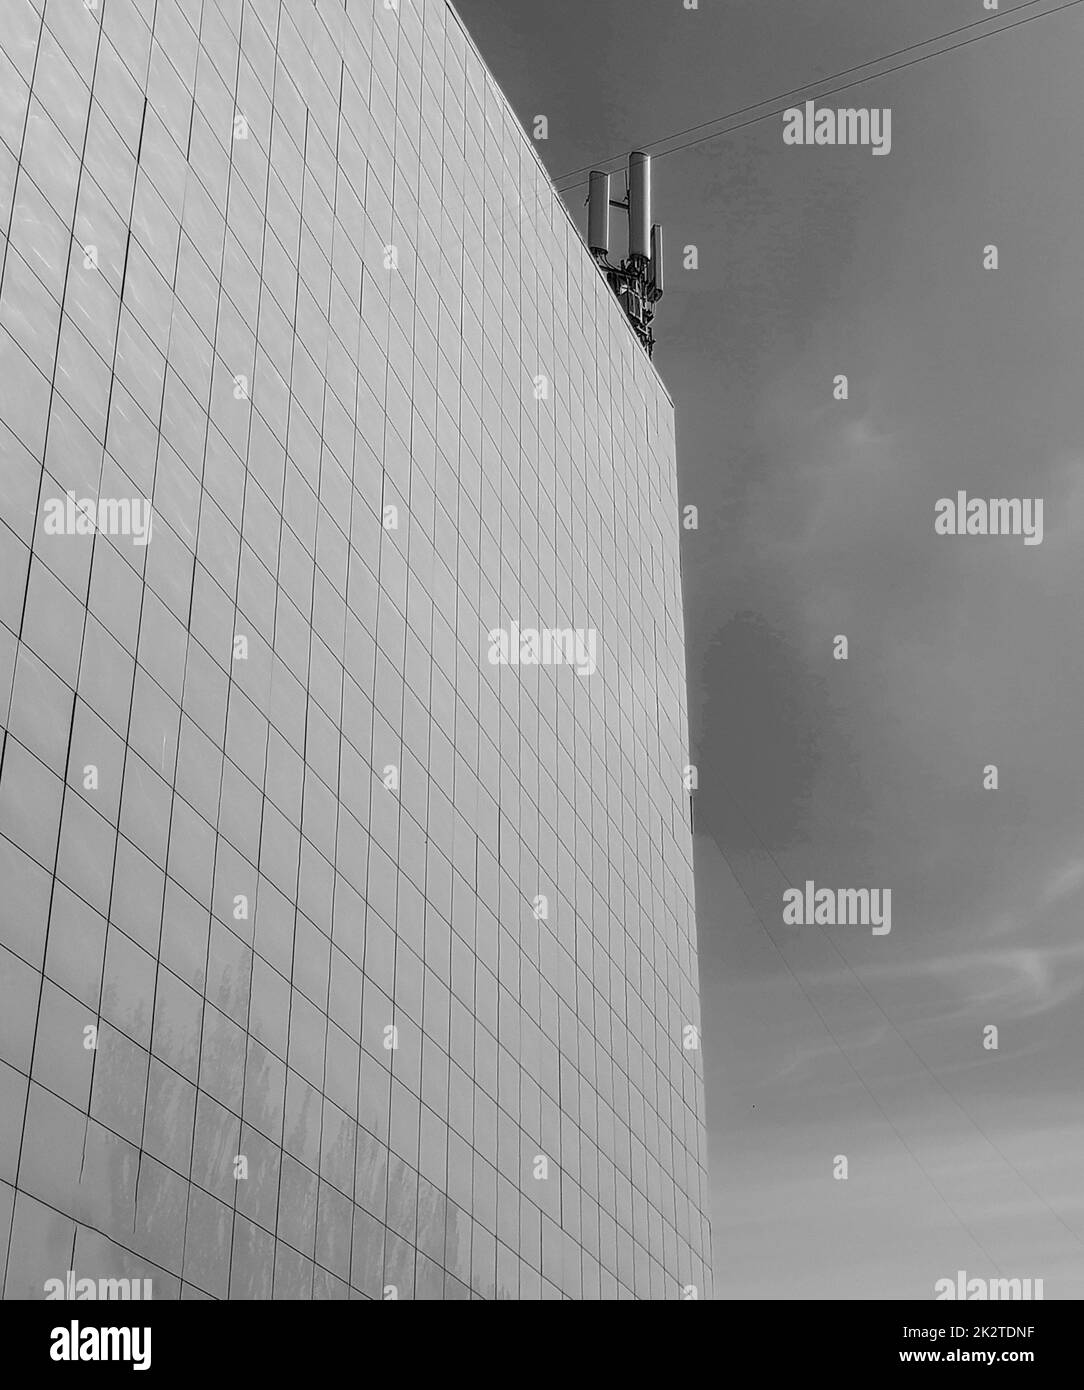 Black-and-white photo The exterior wall of a modern commercial-style building, paneled with tiles, on the roof modern antennas against the sky Stock Photo